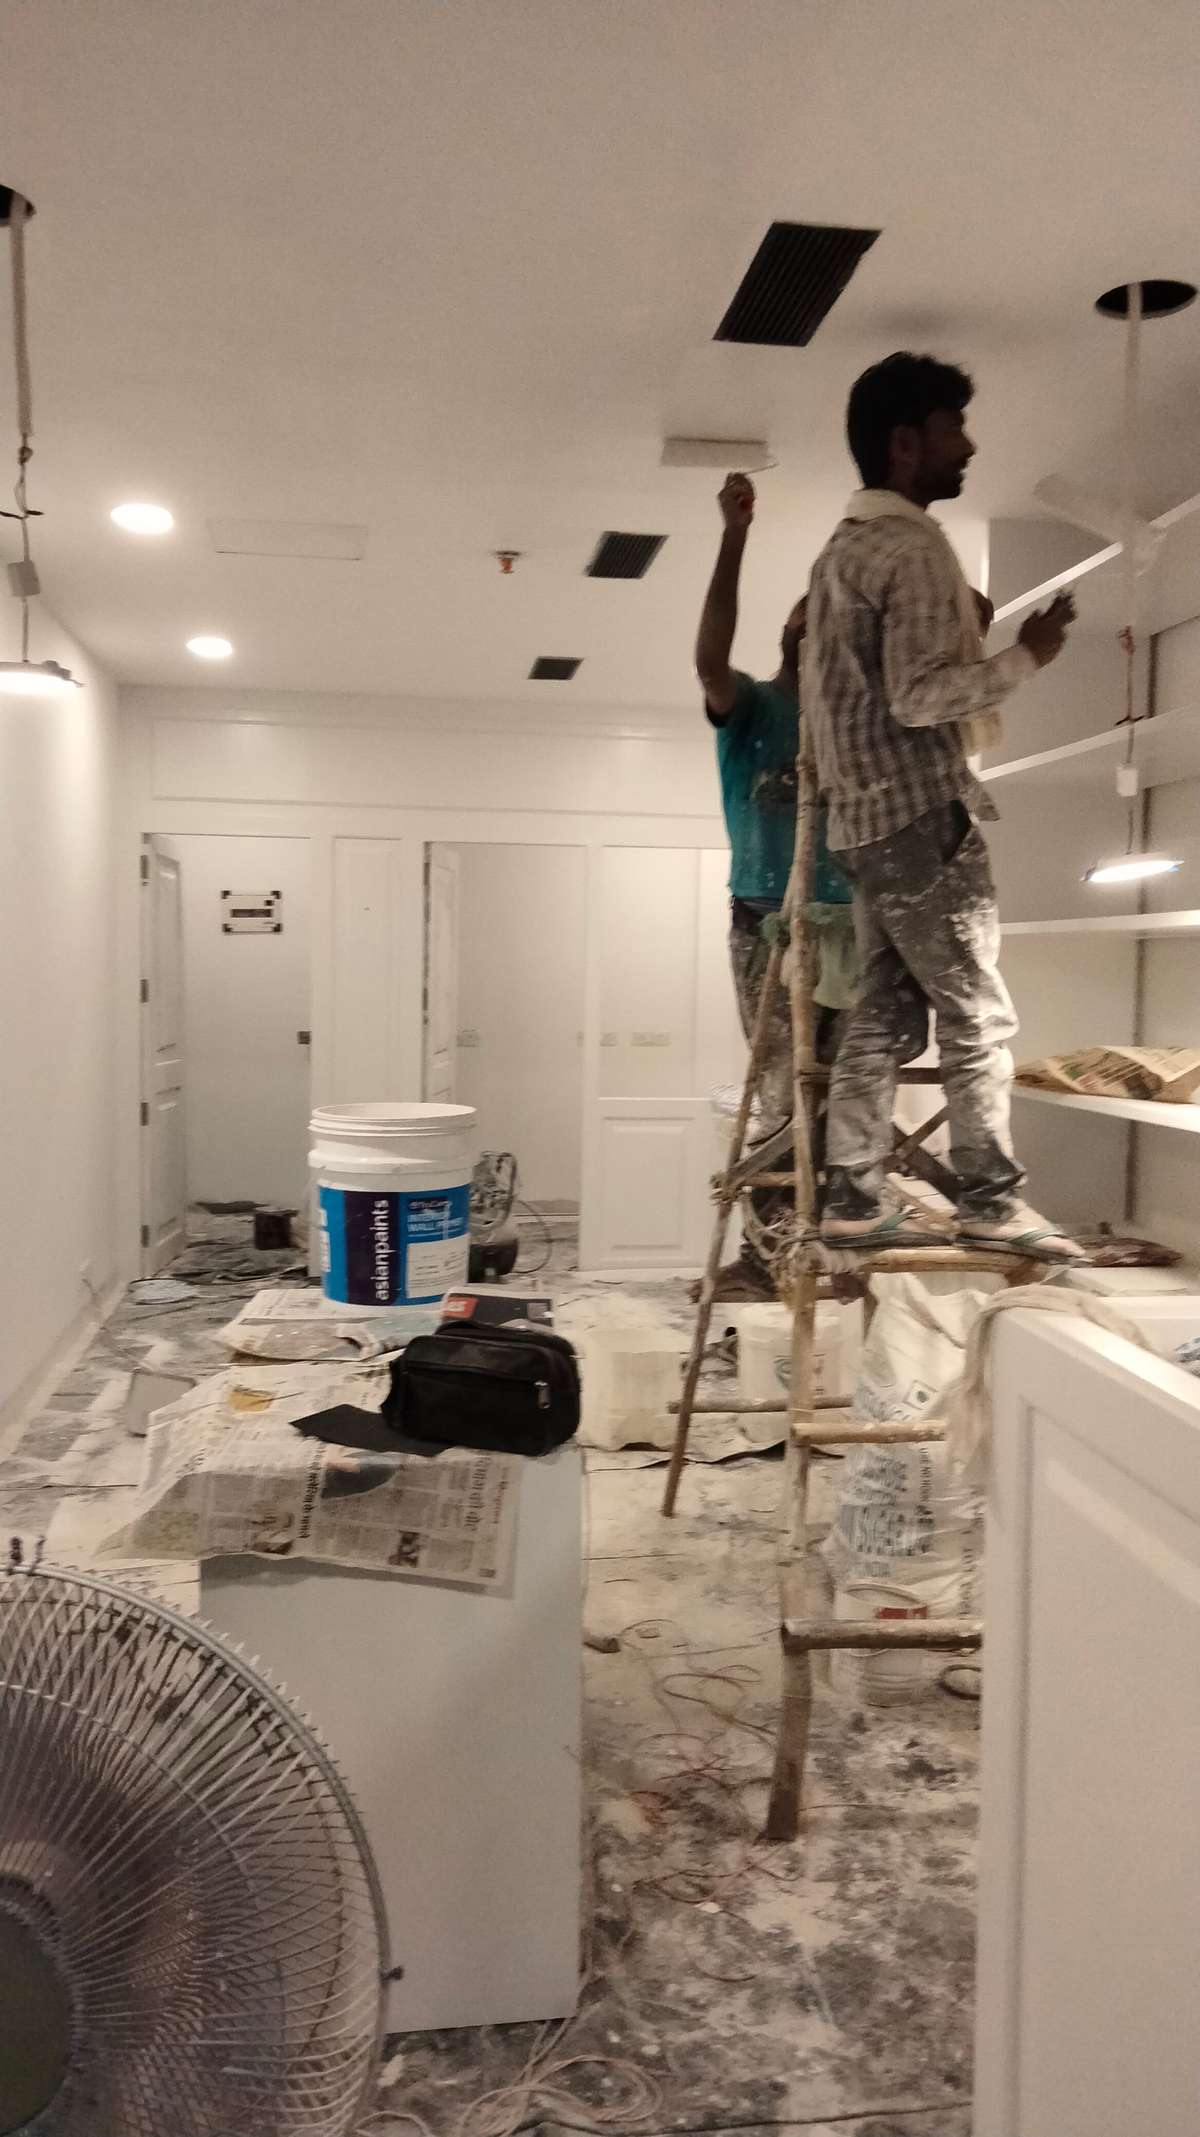 Ceiling, Lighting, Storage Designs by Contractor Taha Mohammad, Delhi | Kolo